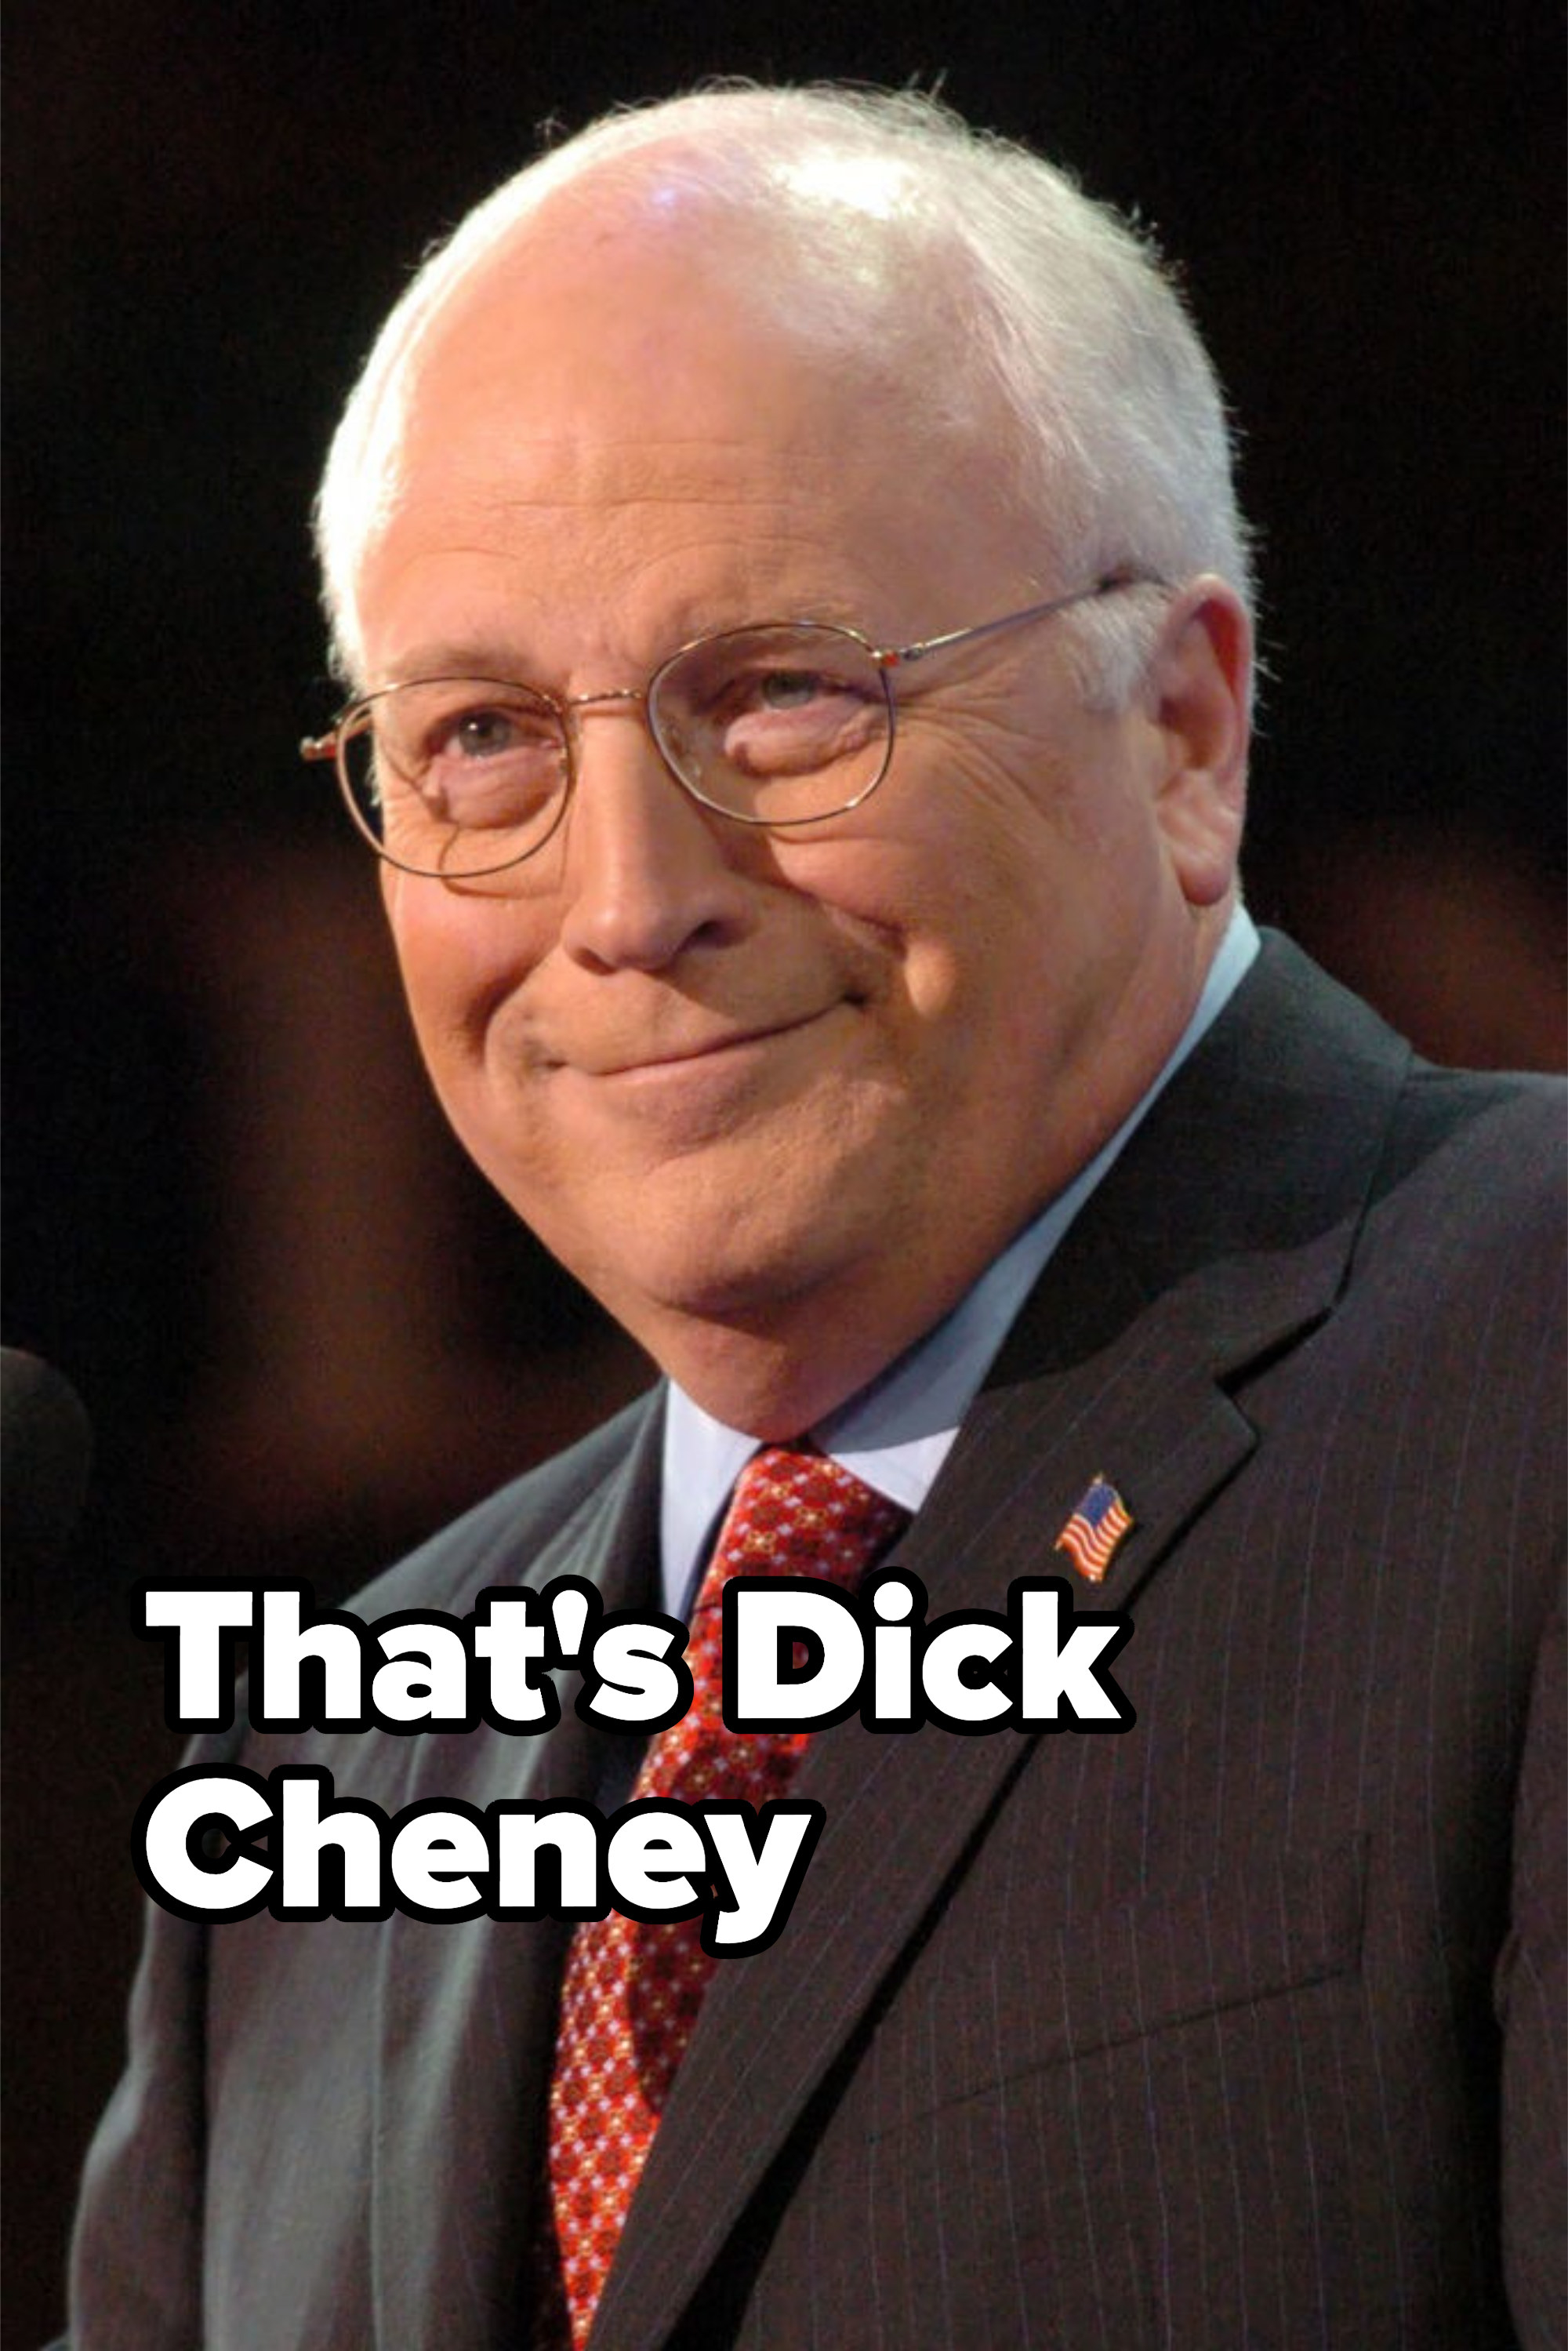 dick cheney with a sly smile